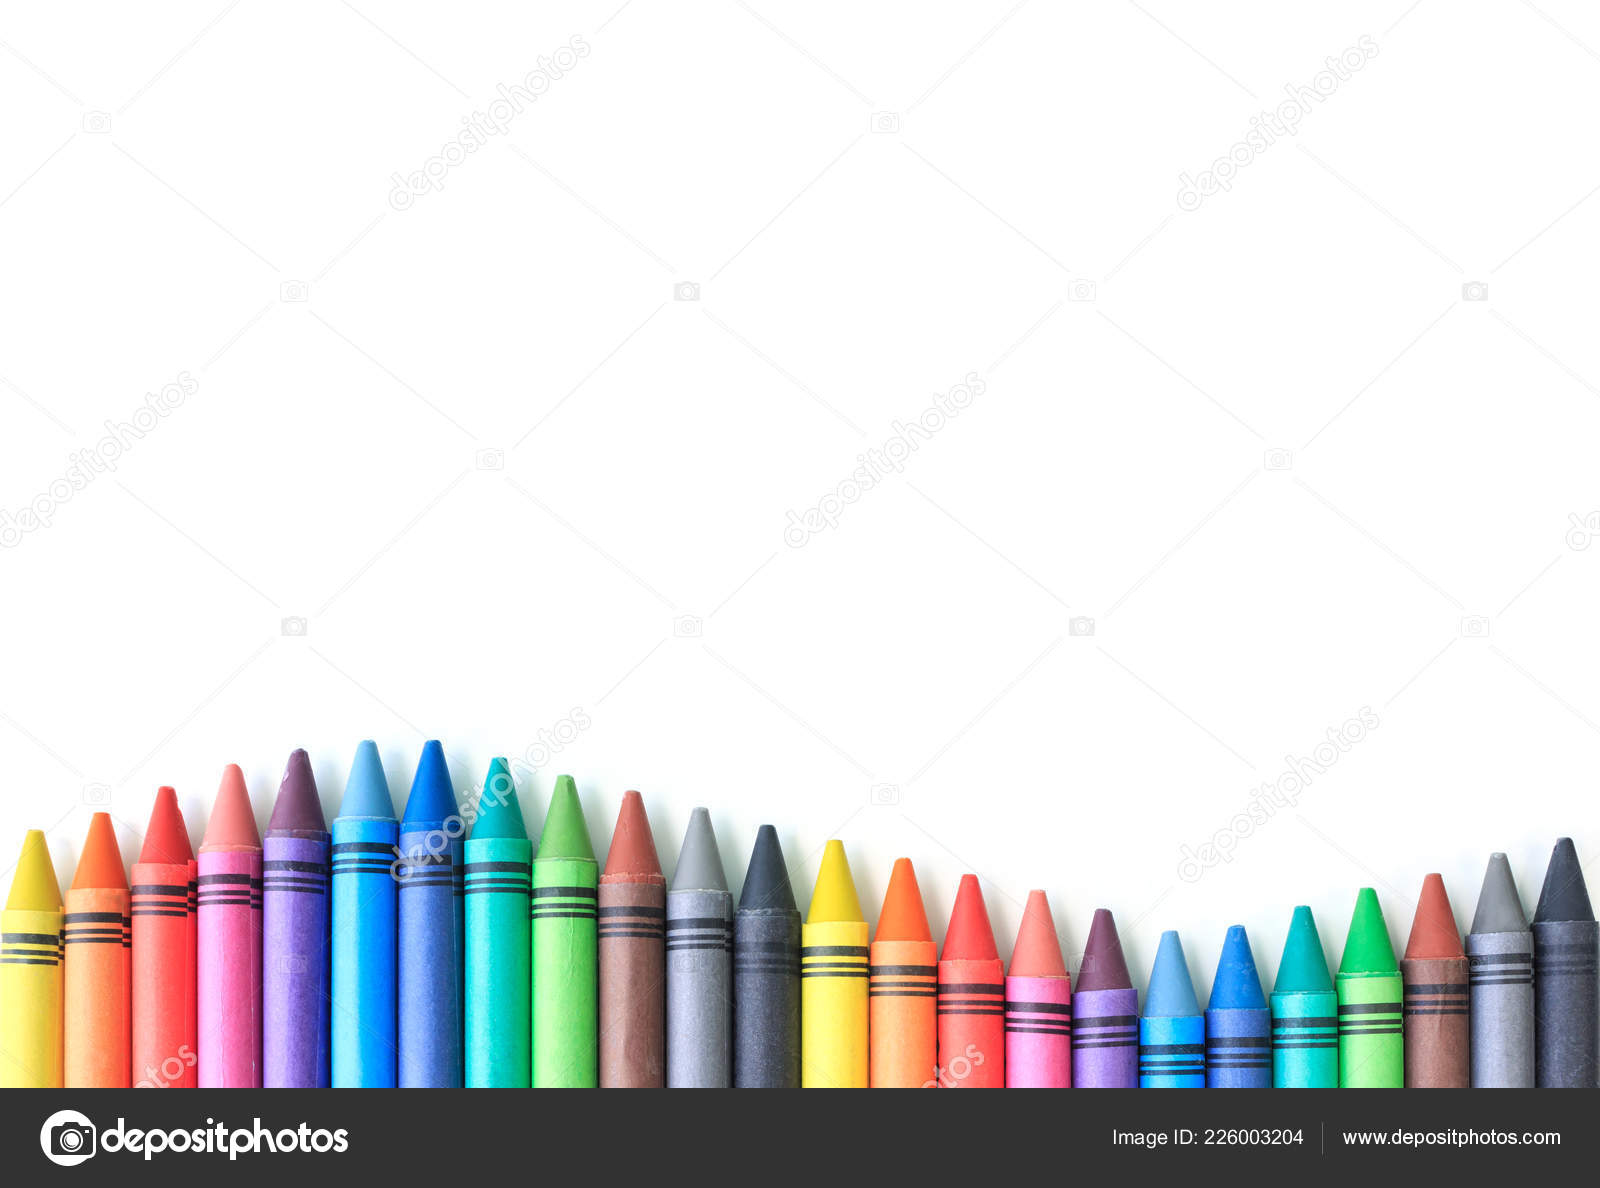 Crayon wallpapers HD  Download Free backgrounds